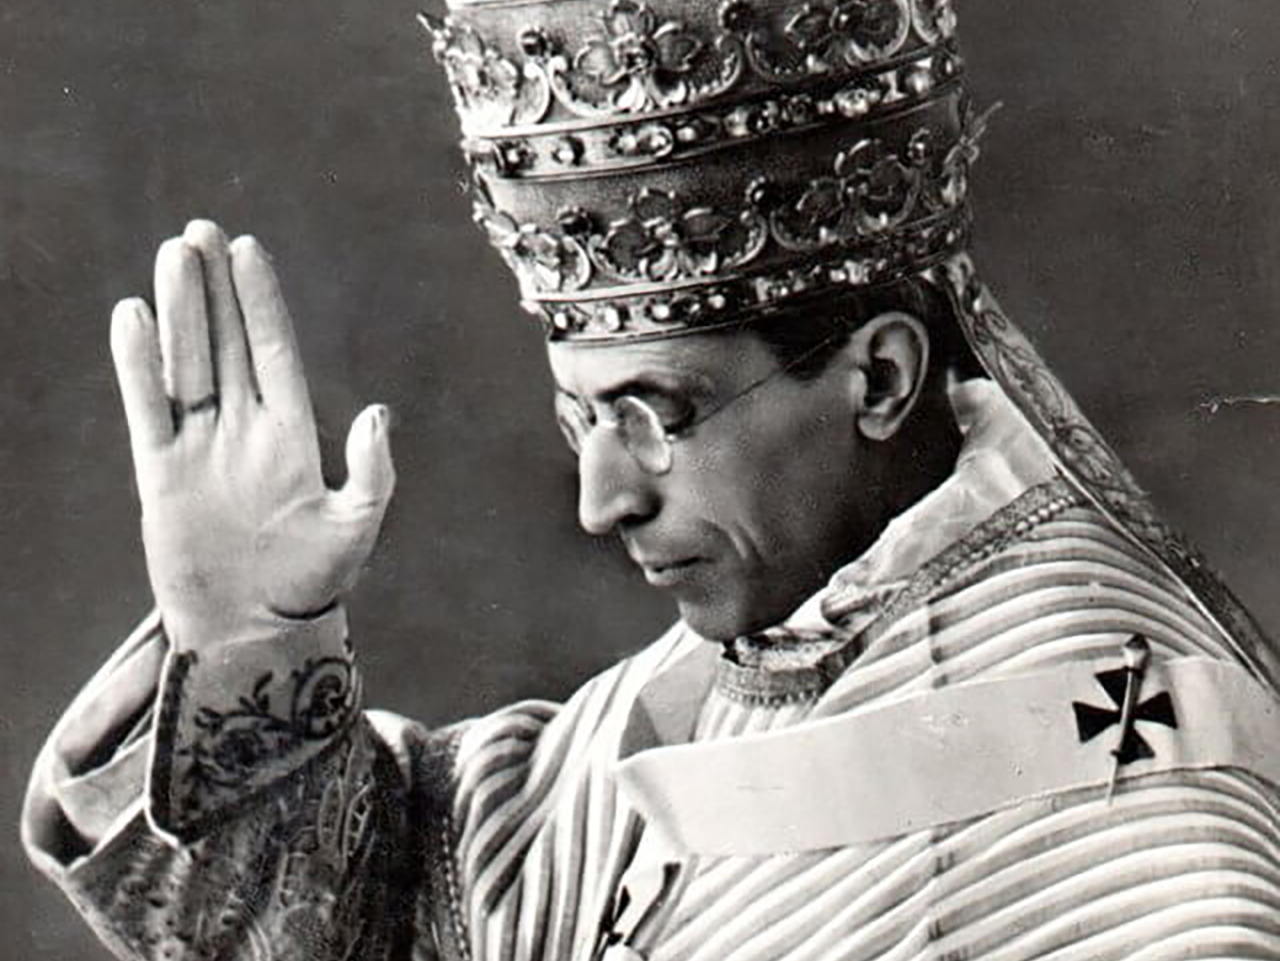 Eugenio Pacelli’s coronation as Pope Pius XII on March 12, 1939.